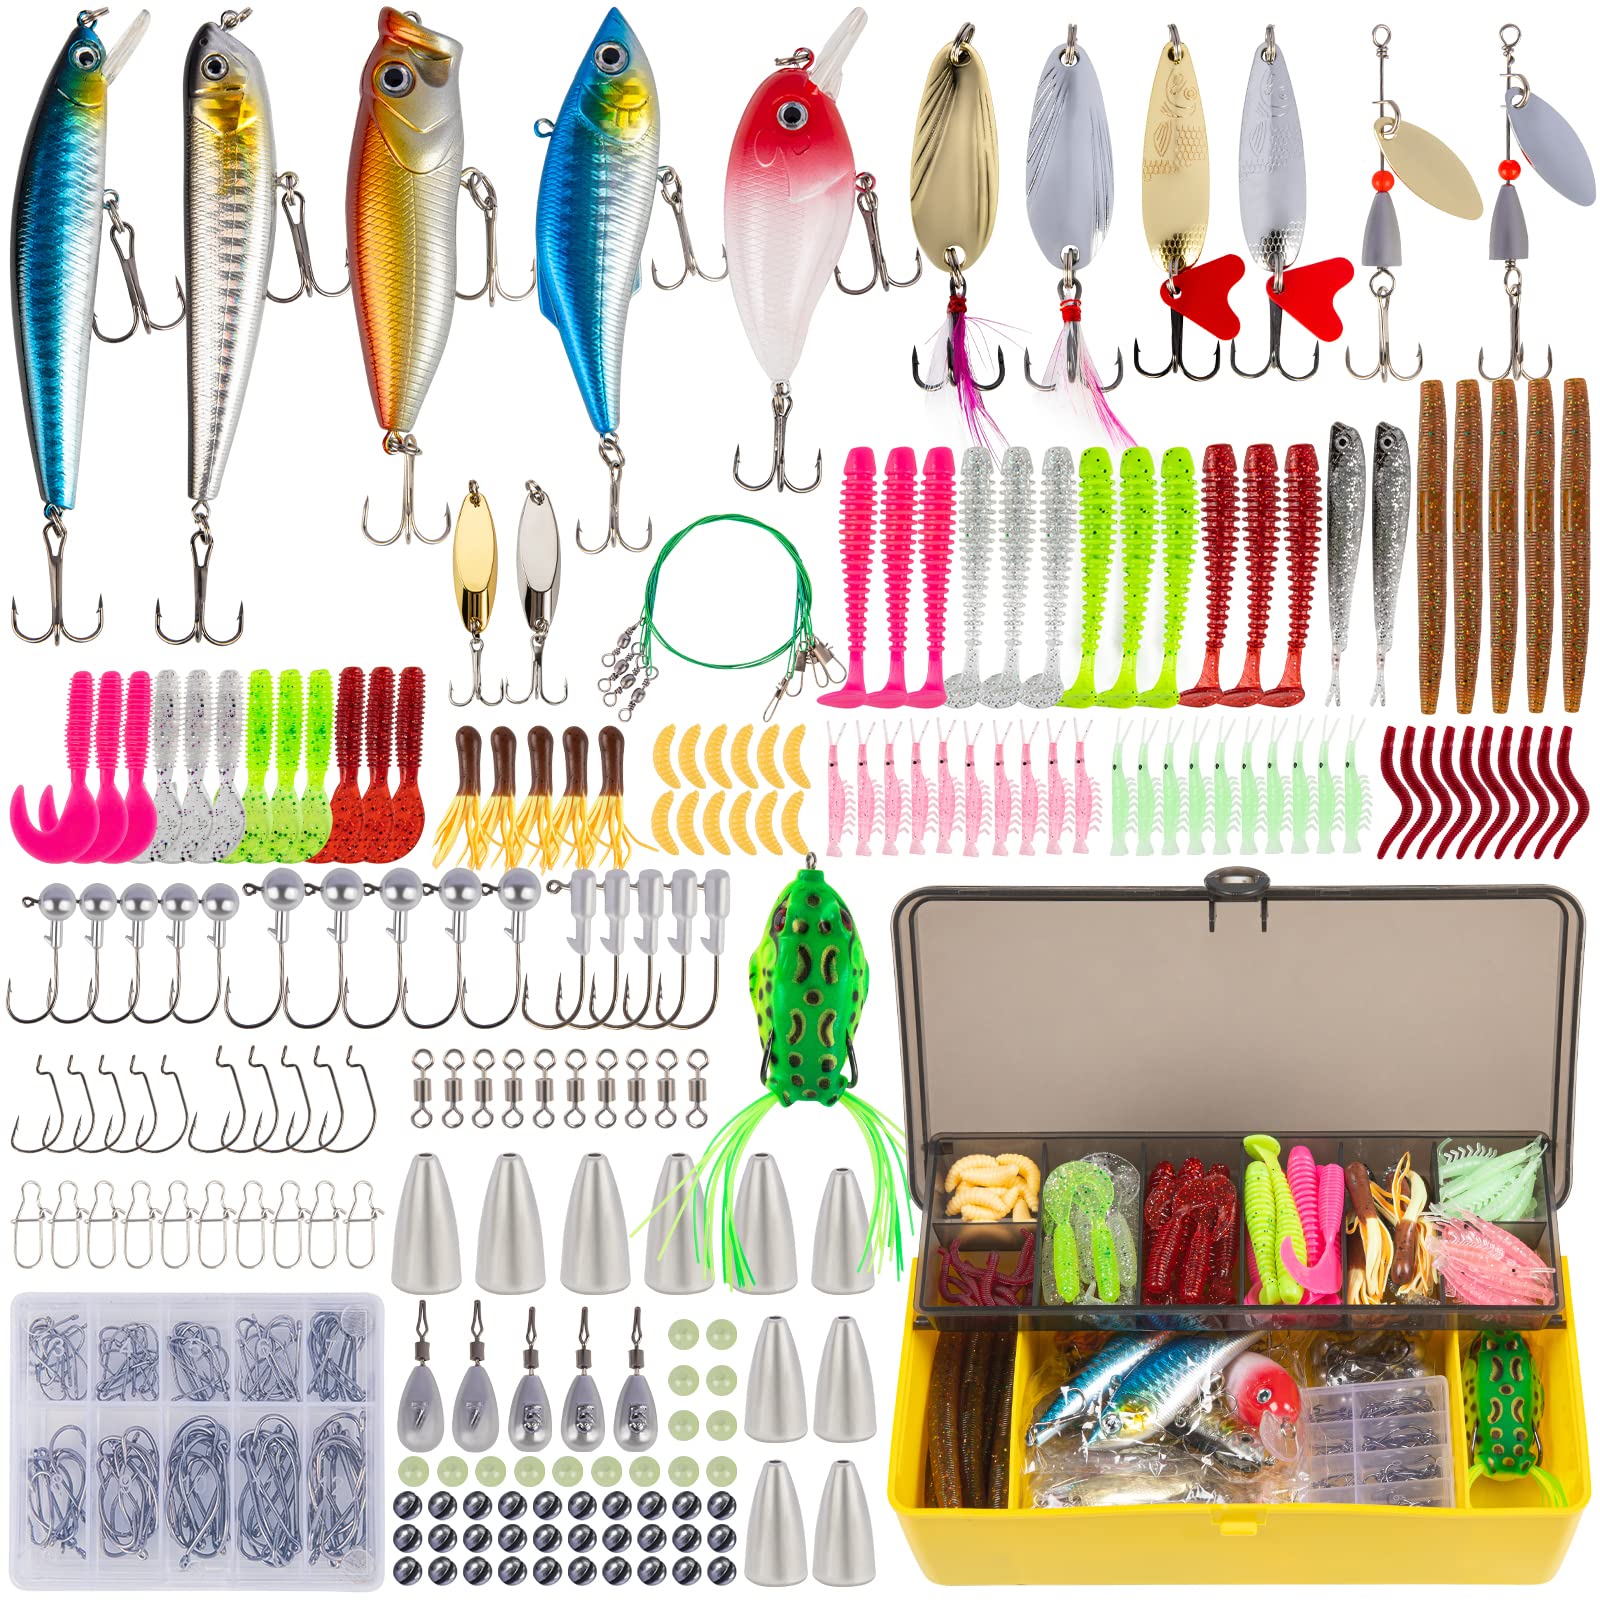 Teotake Fishing Lures Kit, 10 Pieces Fishing Soft Lure, Fishing Bait Fishing  Tackle Accessories Box, Crankbait Fishing Hooks for Saltwater and  Freshwater for Bass Fishing - Hepsiburada Global